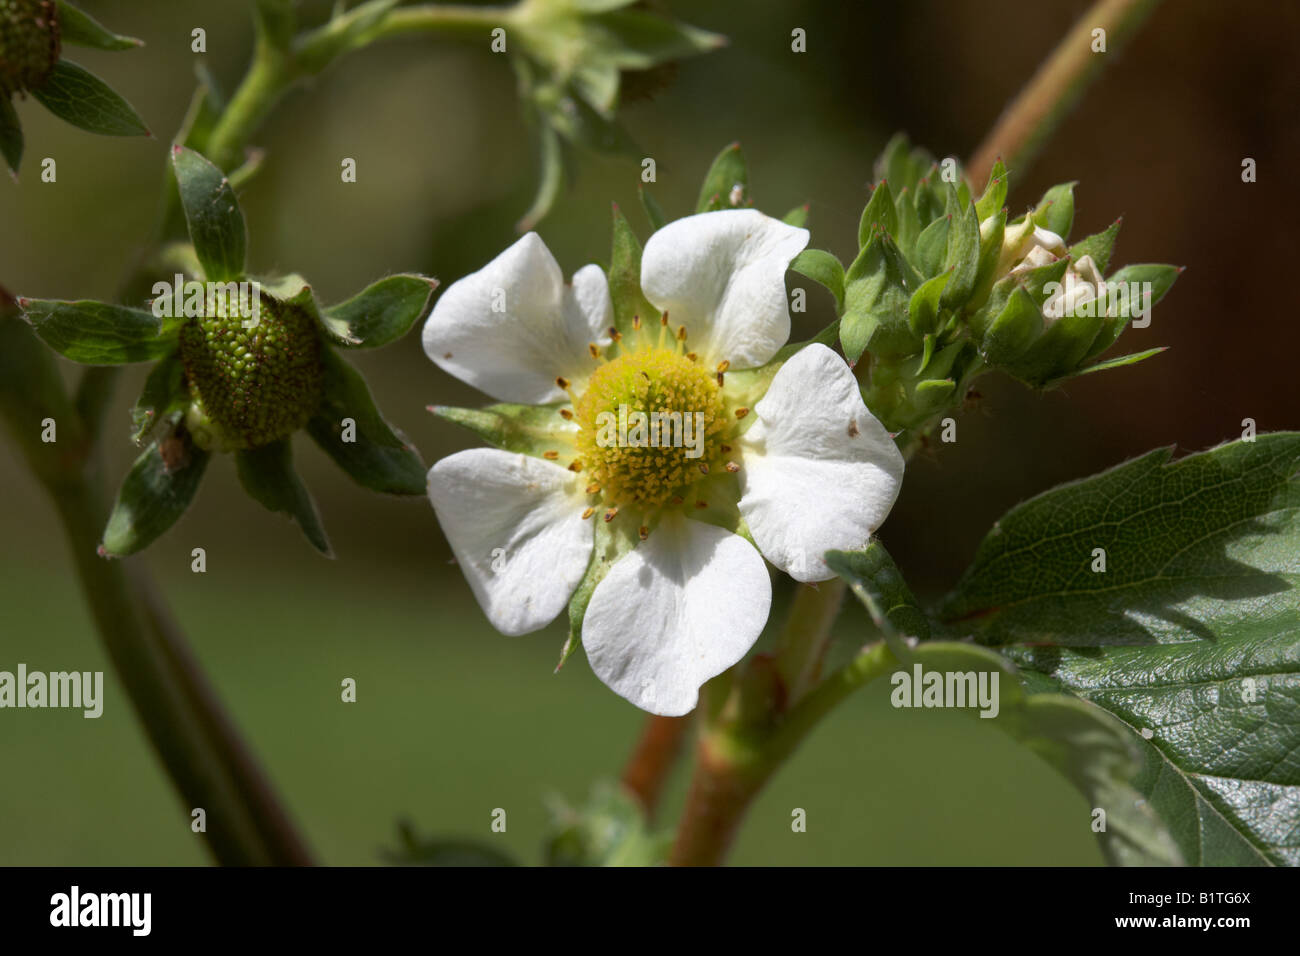 flower with unripe fruit on an elsanta strawberry plant growing from a pot in a garden , northern ireland Stock Photo